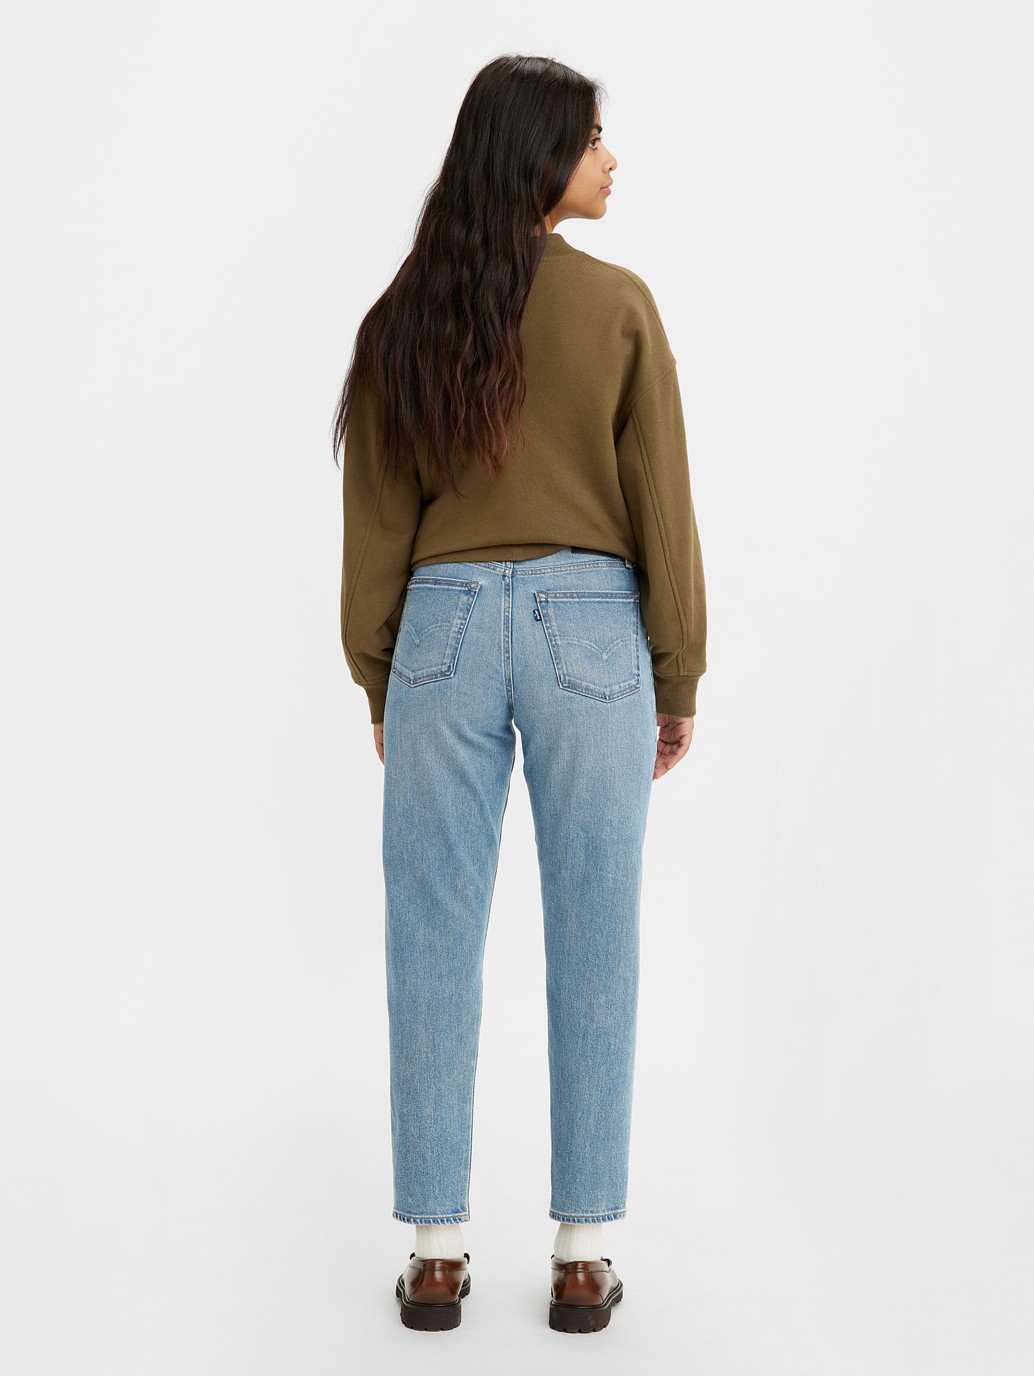 Buy Levi's® Made & Crafted® Women's High Rise Boyfriend Jeans | Levi's®  Official Online Store MY